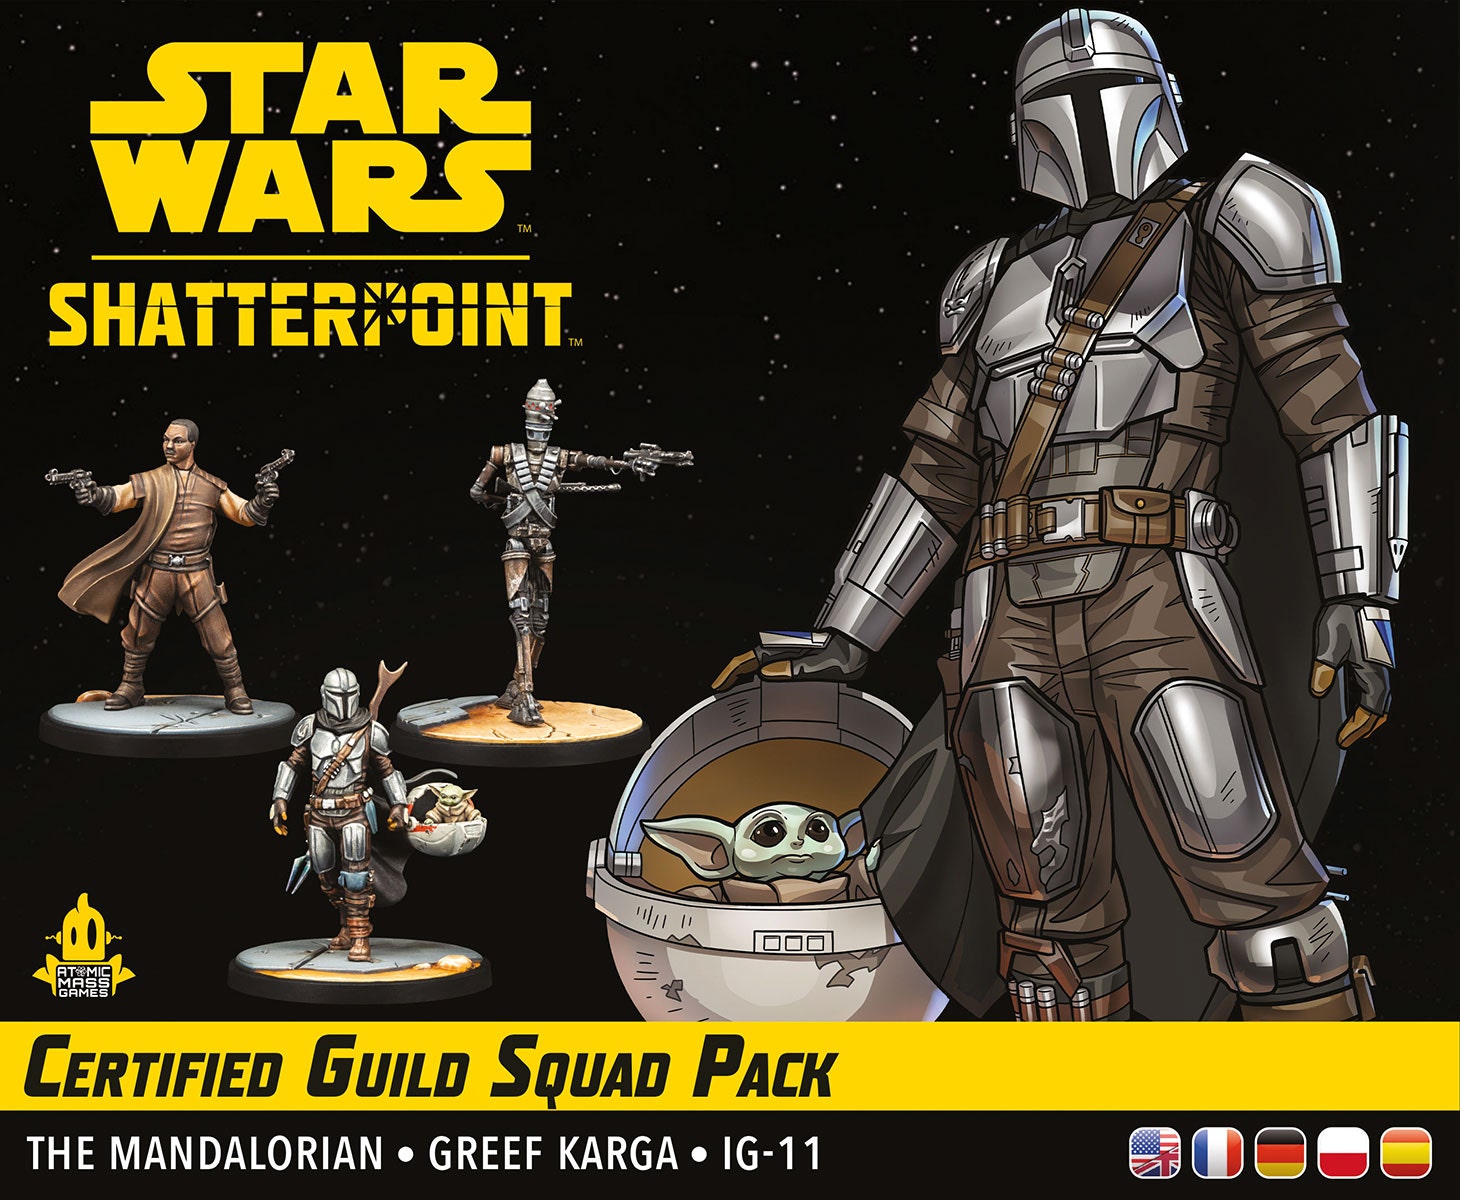 Certified Guild - Squad Pack